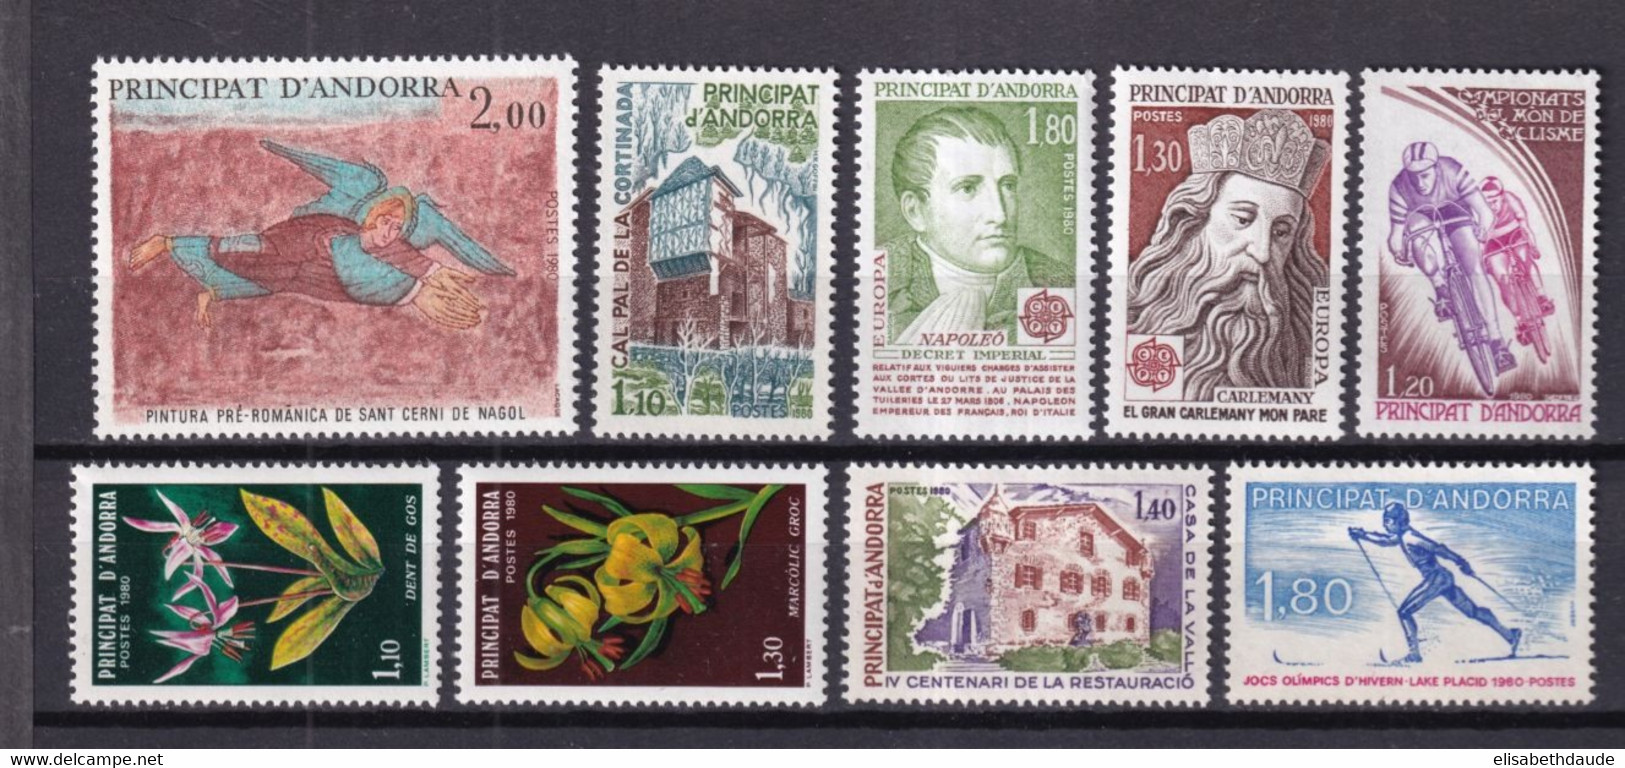 ANDORRE - ANNEE COMPLETE 1980 YVERT N°282/290 ** MNH - COTE 2017 = 14.4 EUR. - - Annate Complete